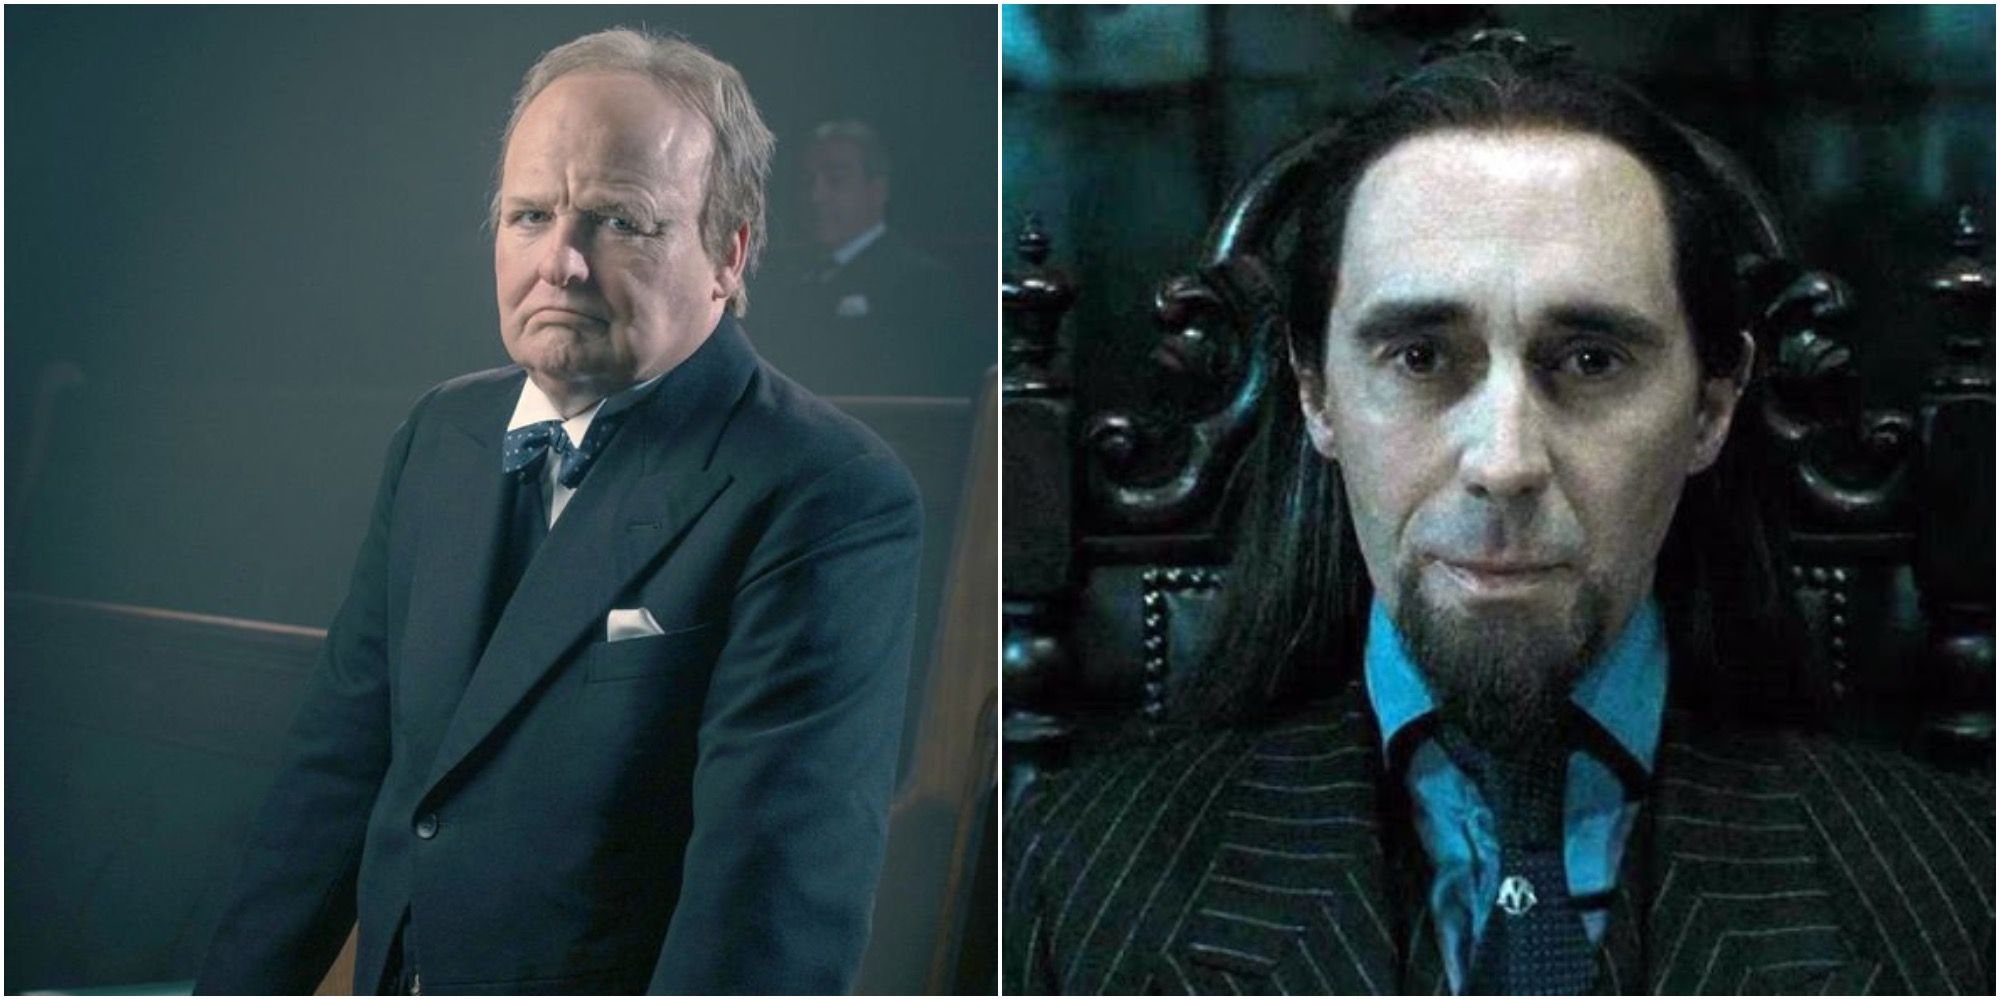 Split image of Winston Churchill (Peaky Blinders) and Pius Thicknesse (Harry Potter)